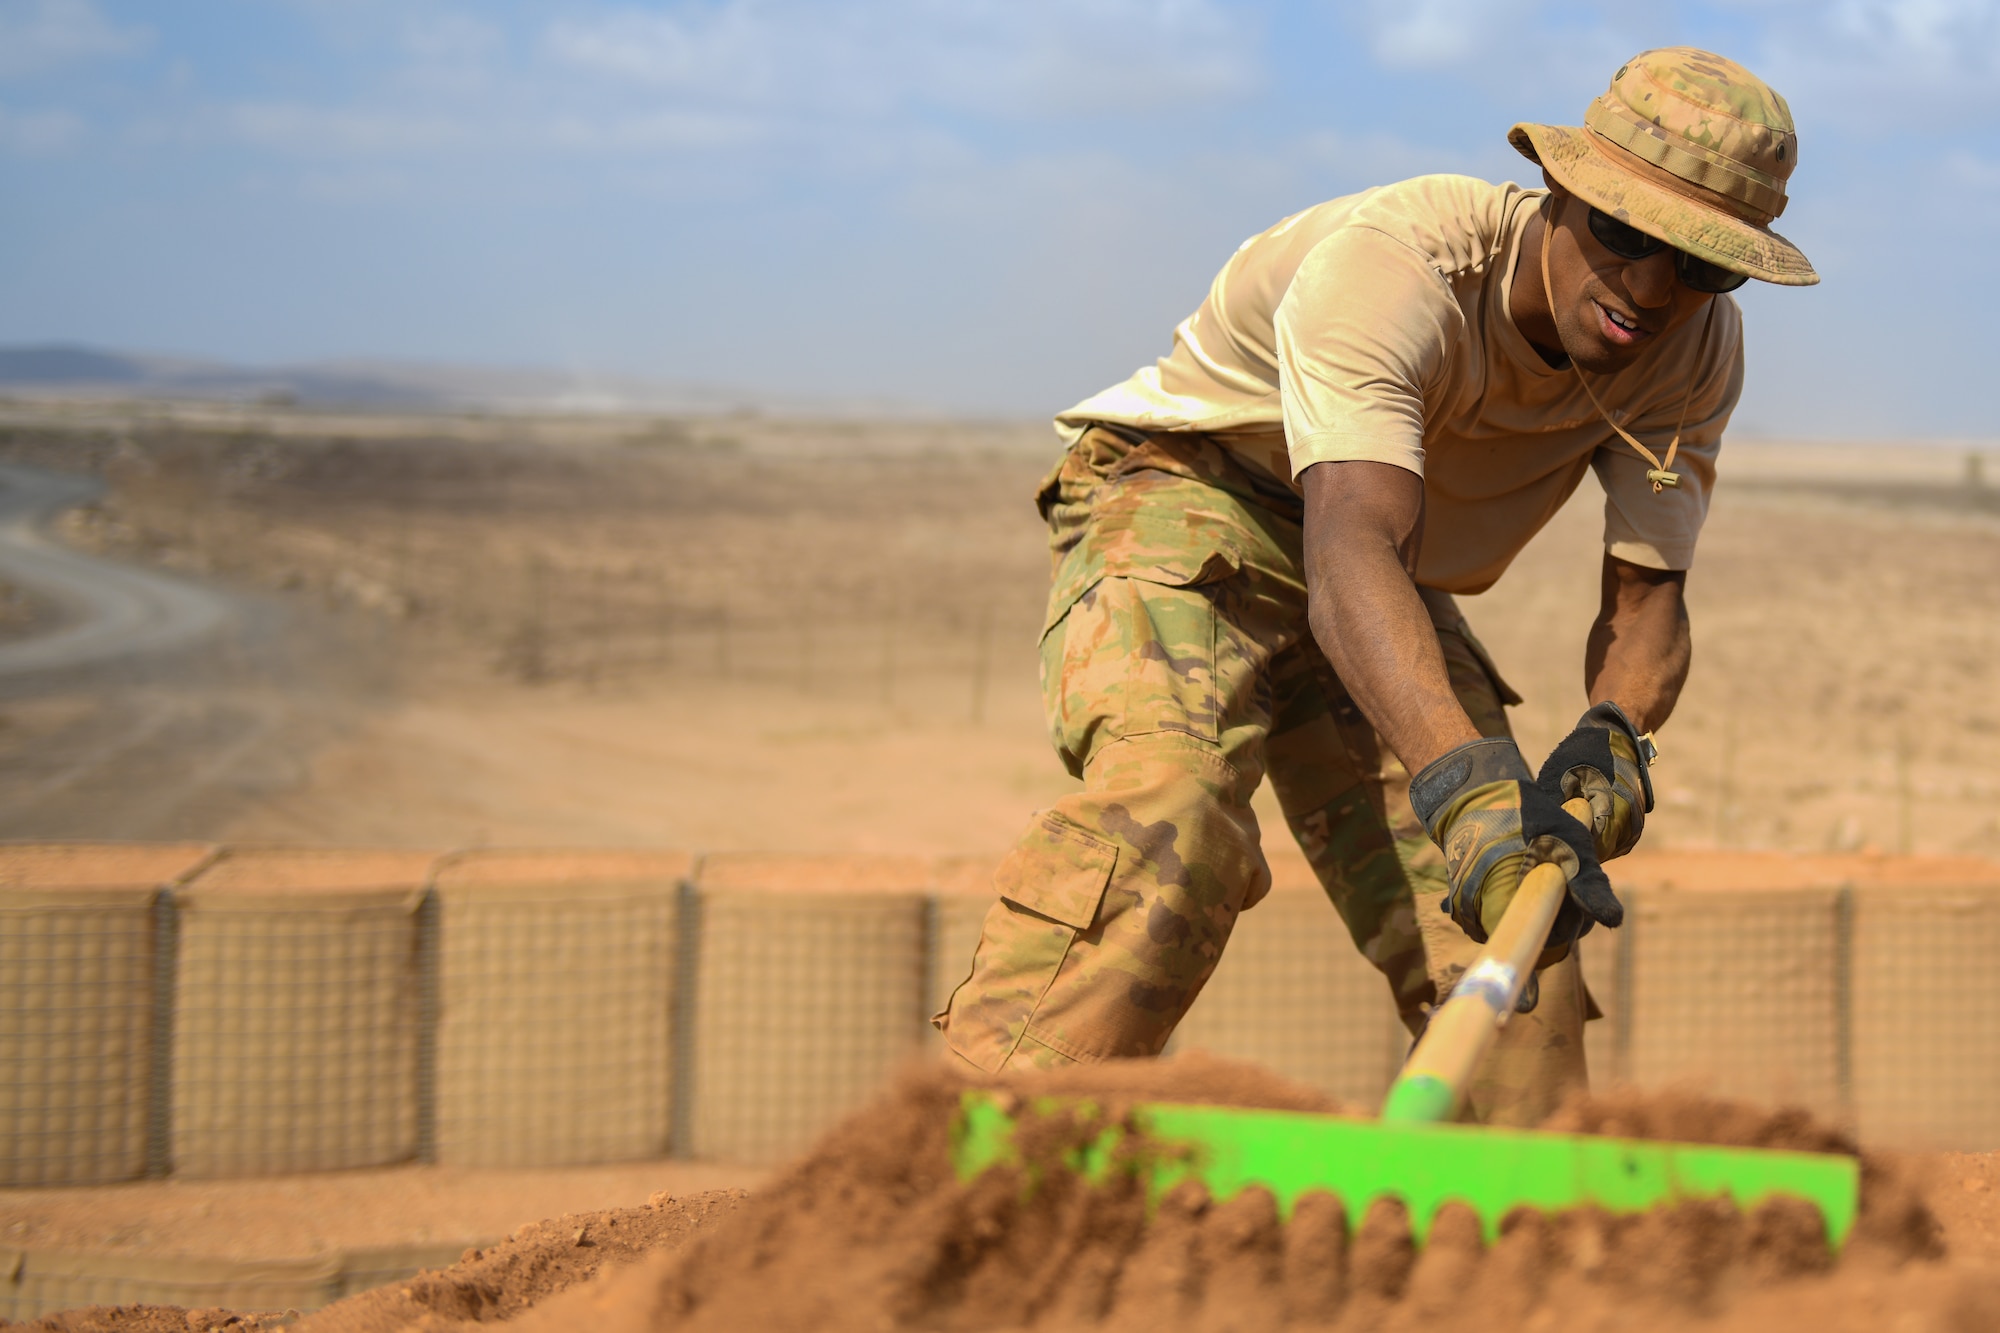 U.S. Air Force Senior Airman Erek Bowens, 776th Expeditionary Air Base Squadron heavy equipment operator, rakes dirt to level out the ground of a storage area at Chabelley Airfield, Djibouti, Dec. 8, 2021. Bowen’s mission at Chabelley Airfield is to support base infrastructure while also ensuring an operational airfield. (U.S. Air Force photo by Senior Airman Ericka A. Woolever)